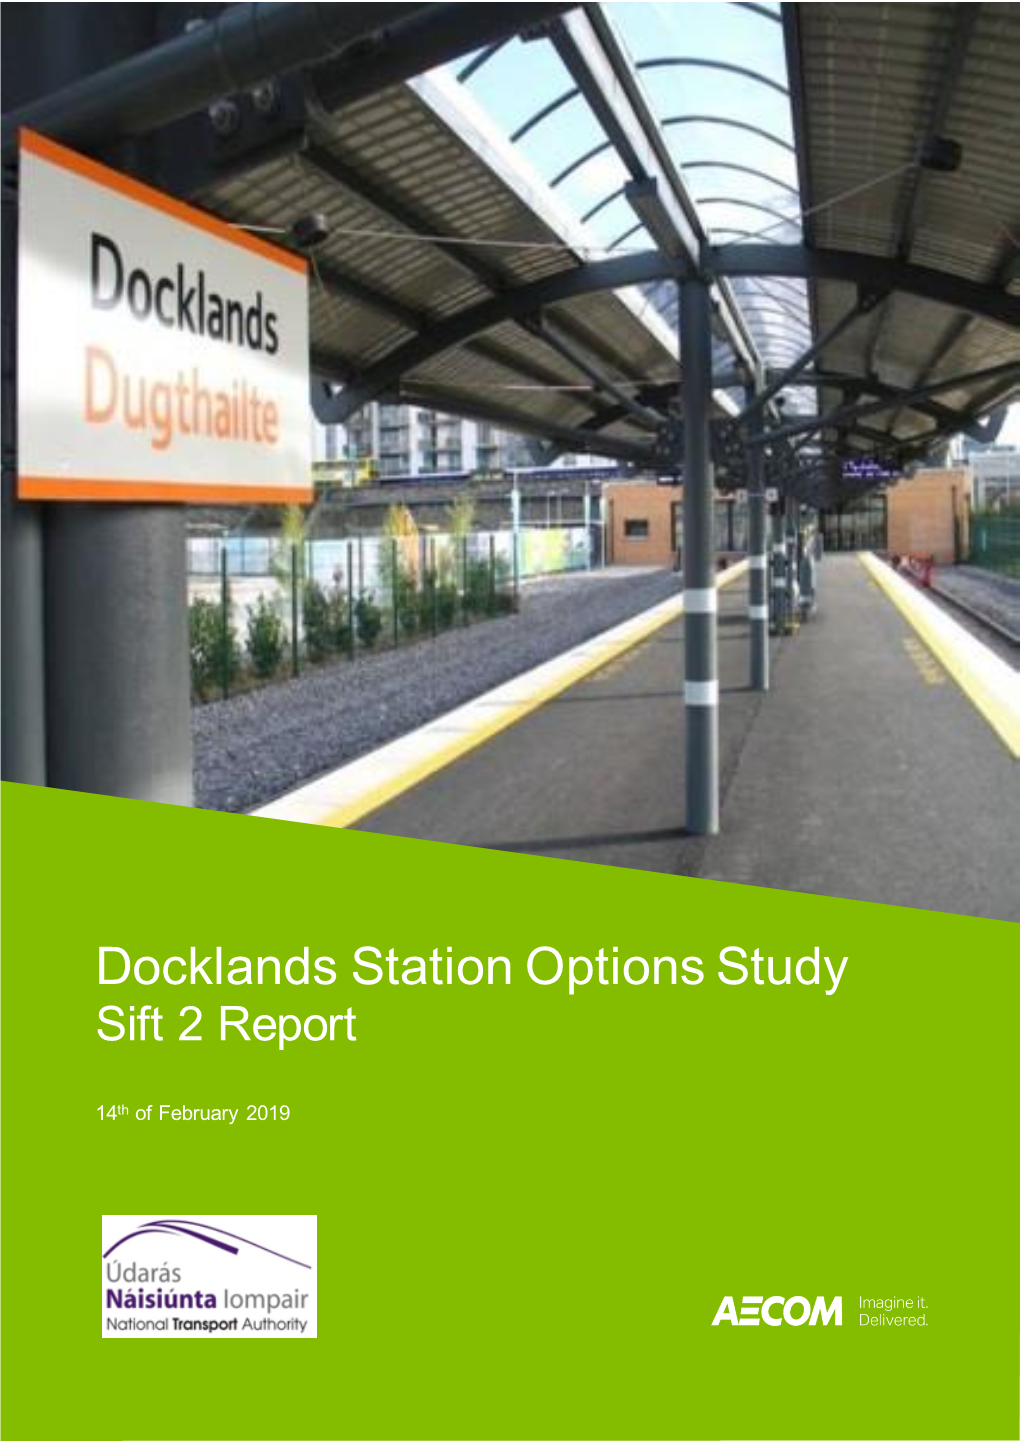 Annex 9.2 Docklands Station Options Study Options Sift 2 Report